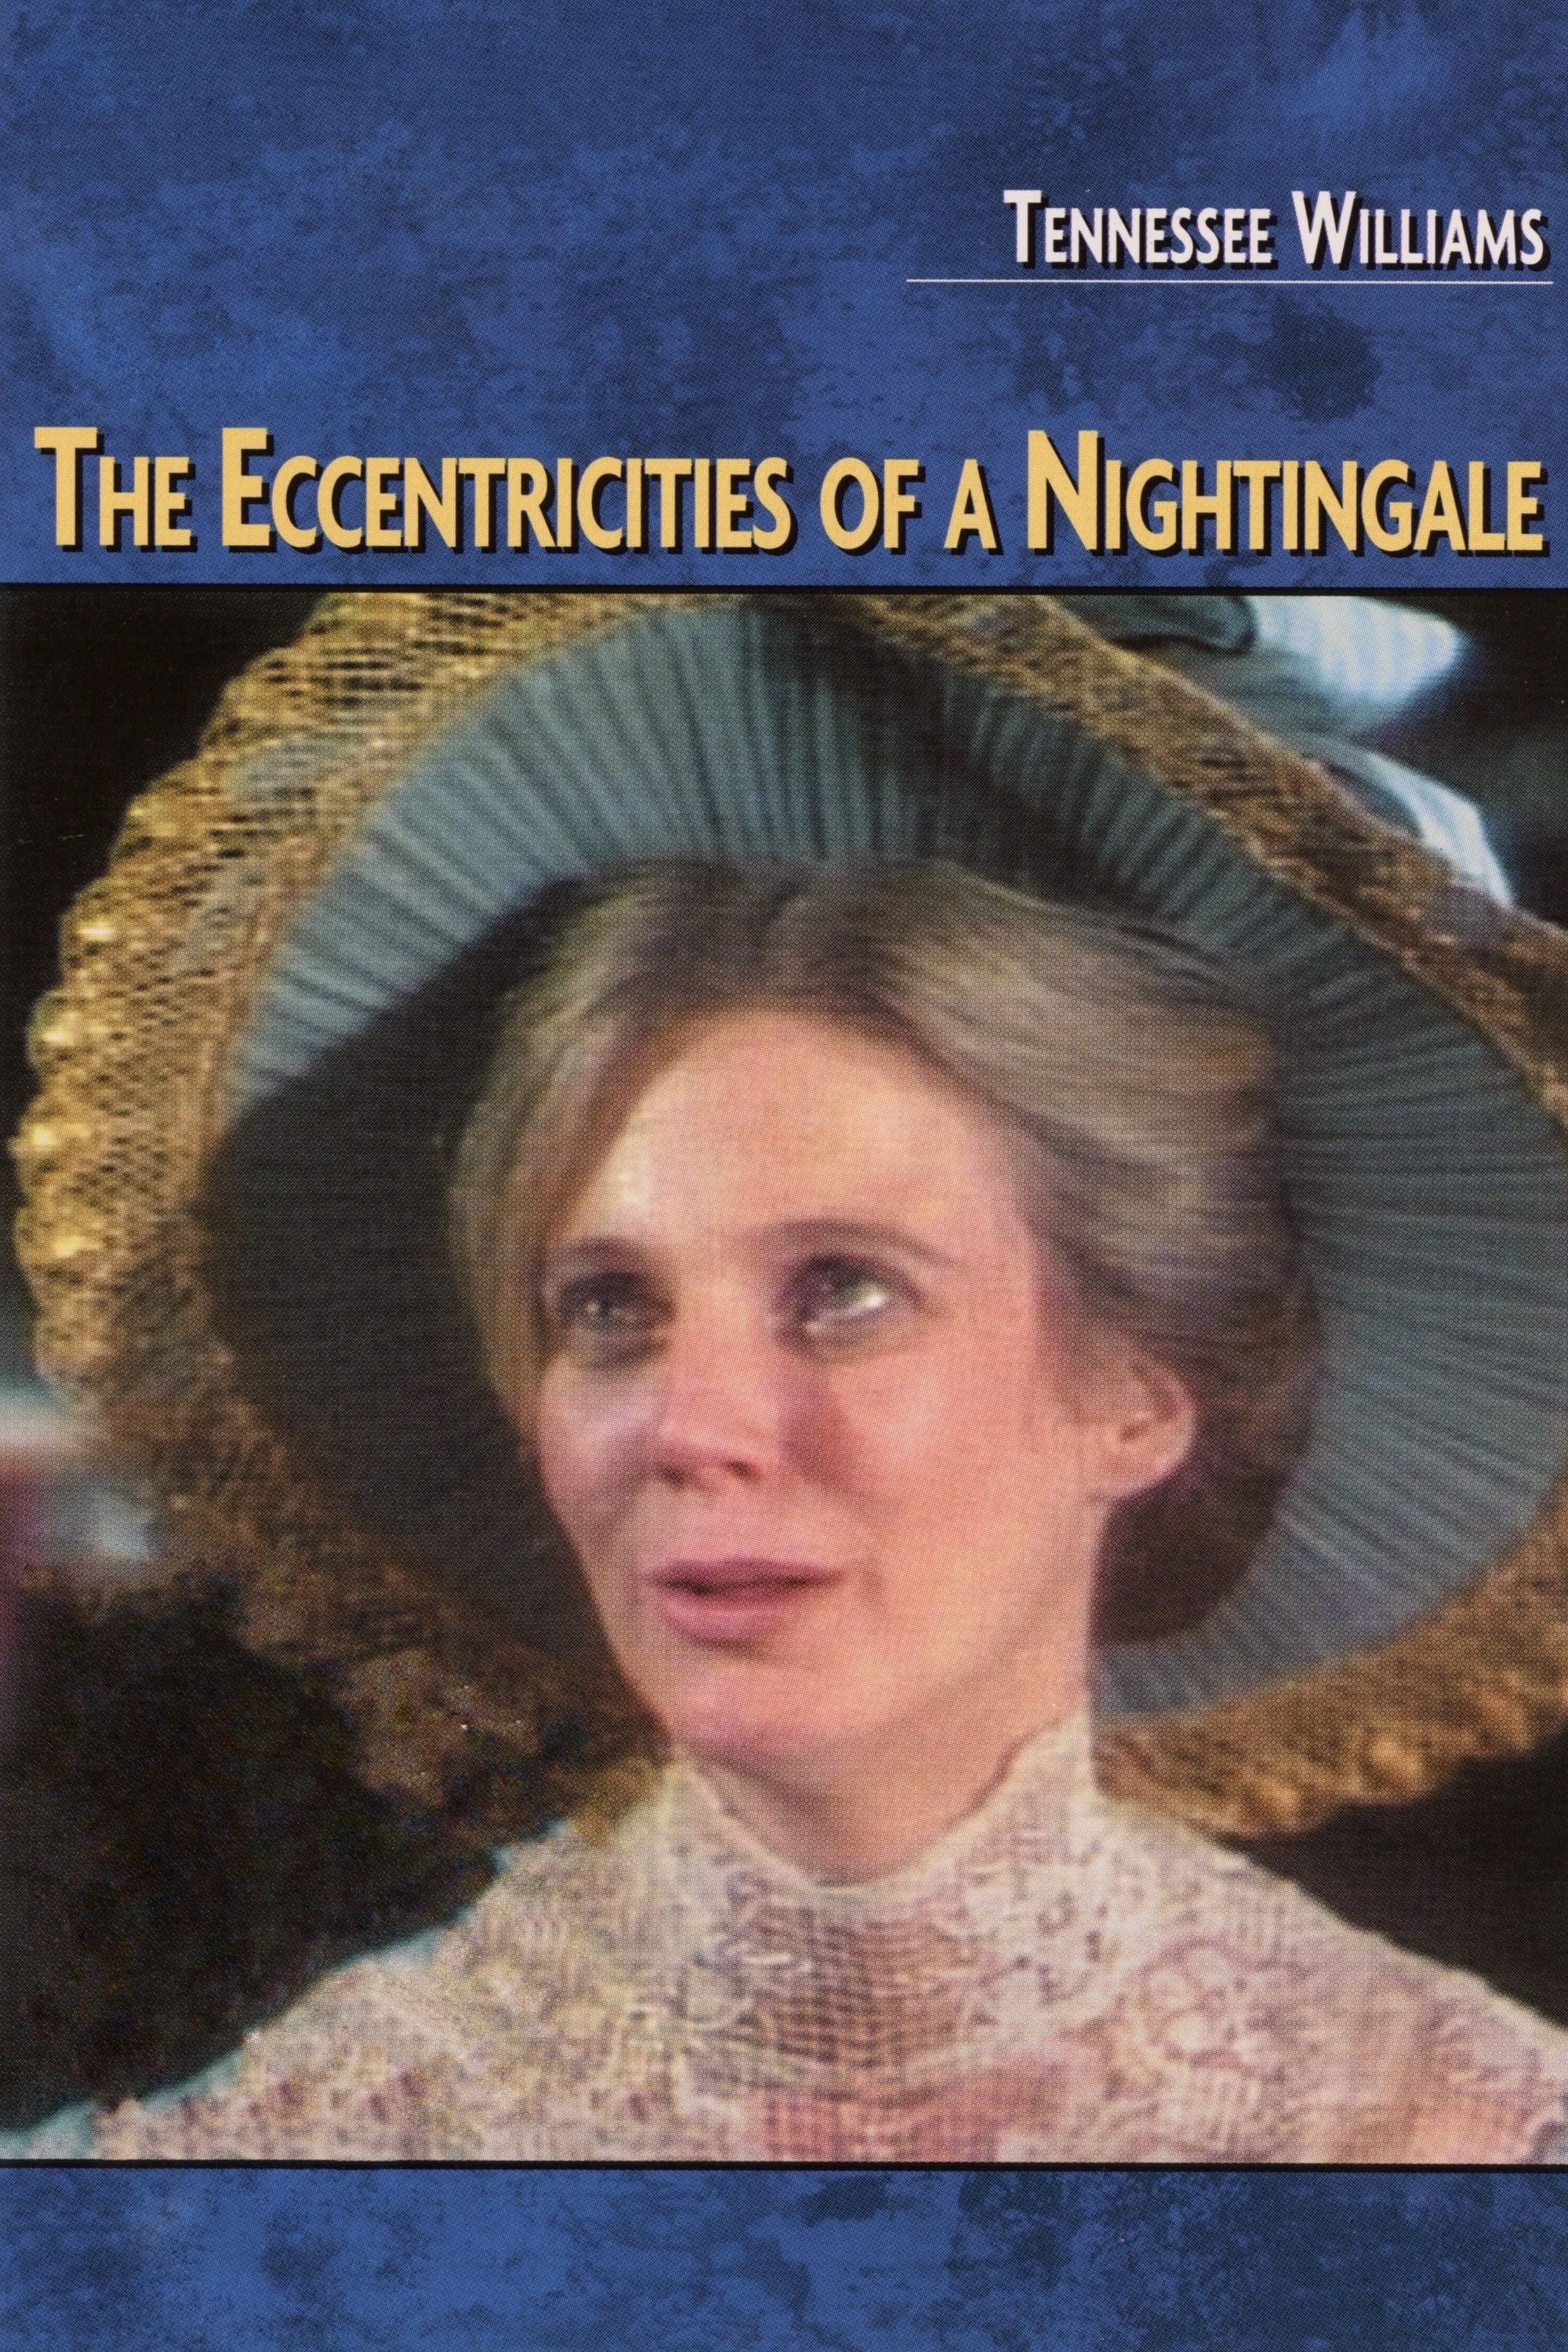 The Eccentricities of a Nightingale (1976)